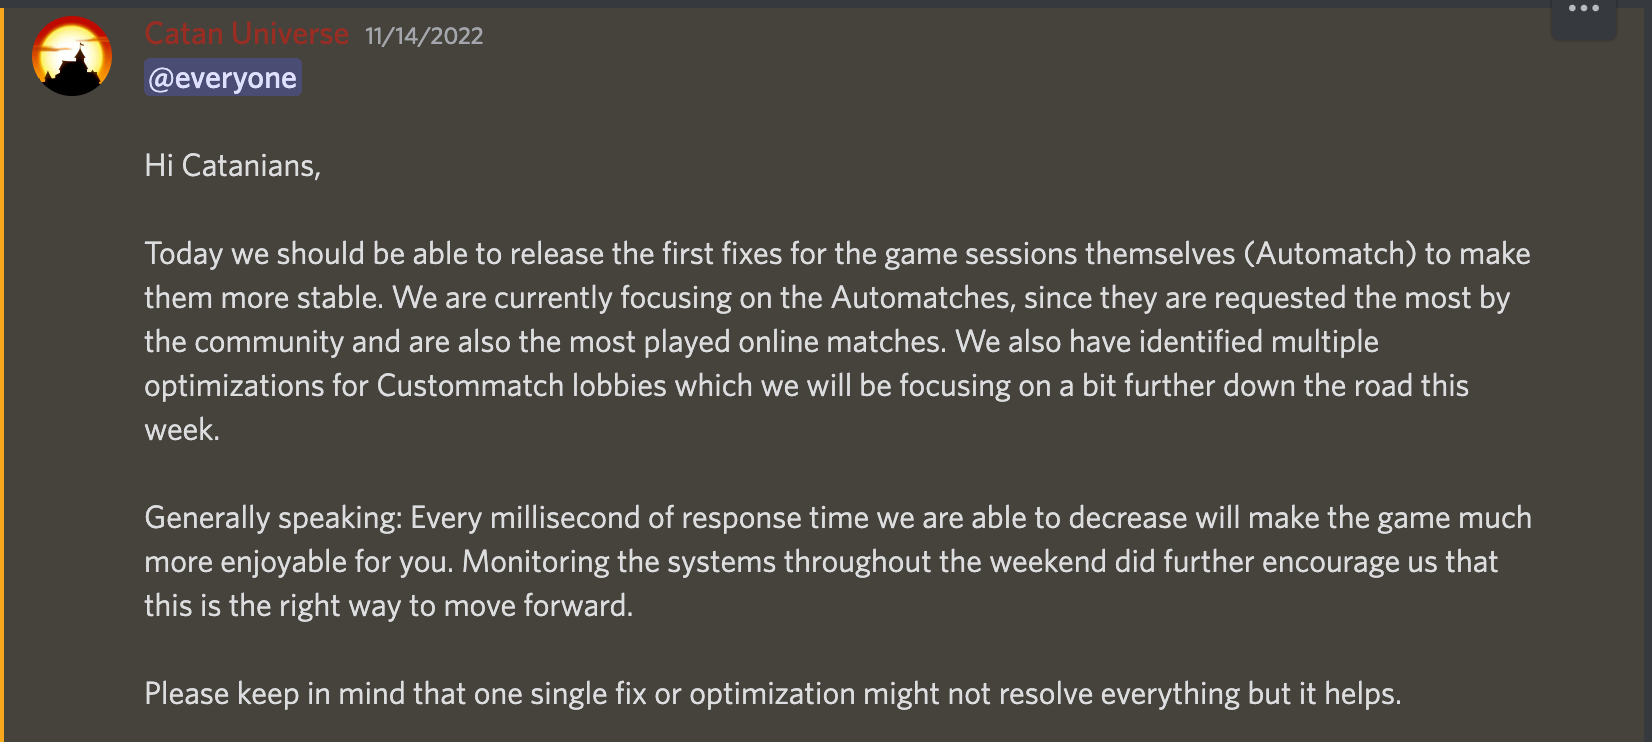 Catan Universe's discord account announces that the issues are being fixed (nov 14th)